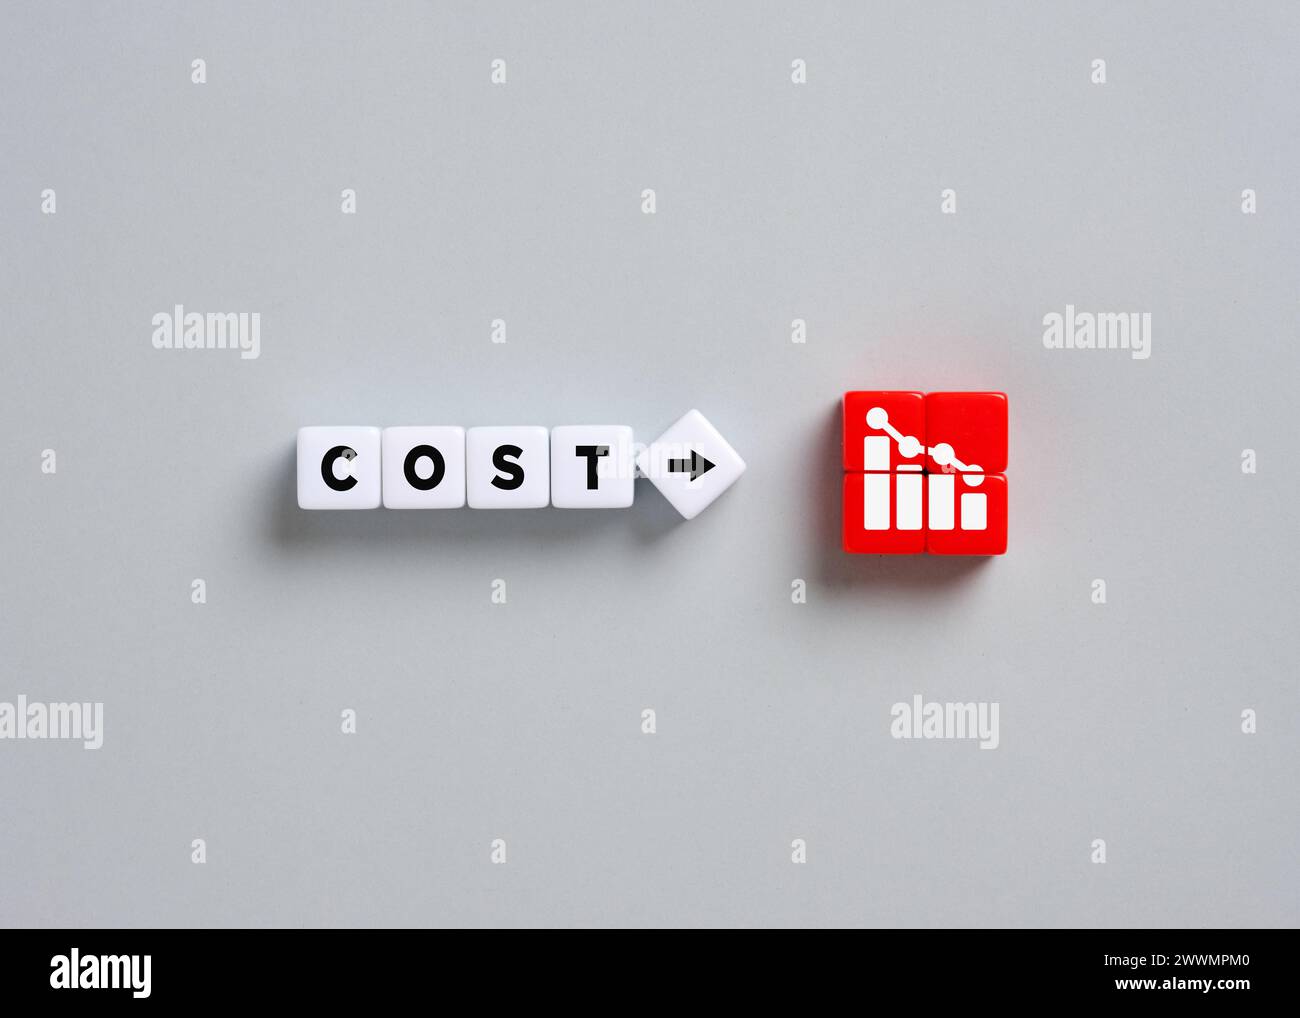 Cost reduction and optimization. Reducing costs. Cost management. Stock Photo